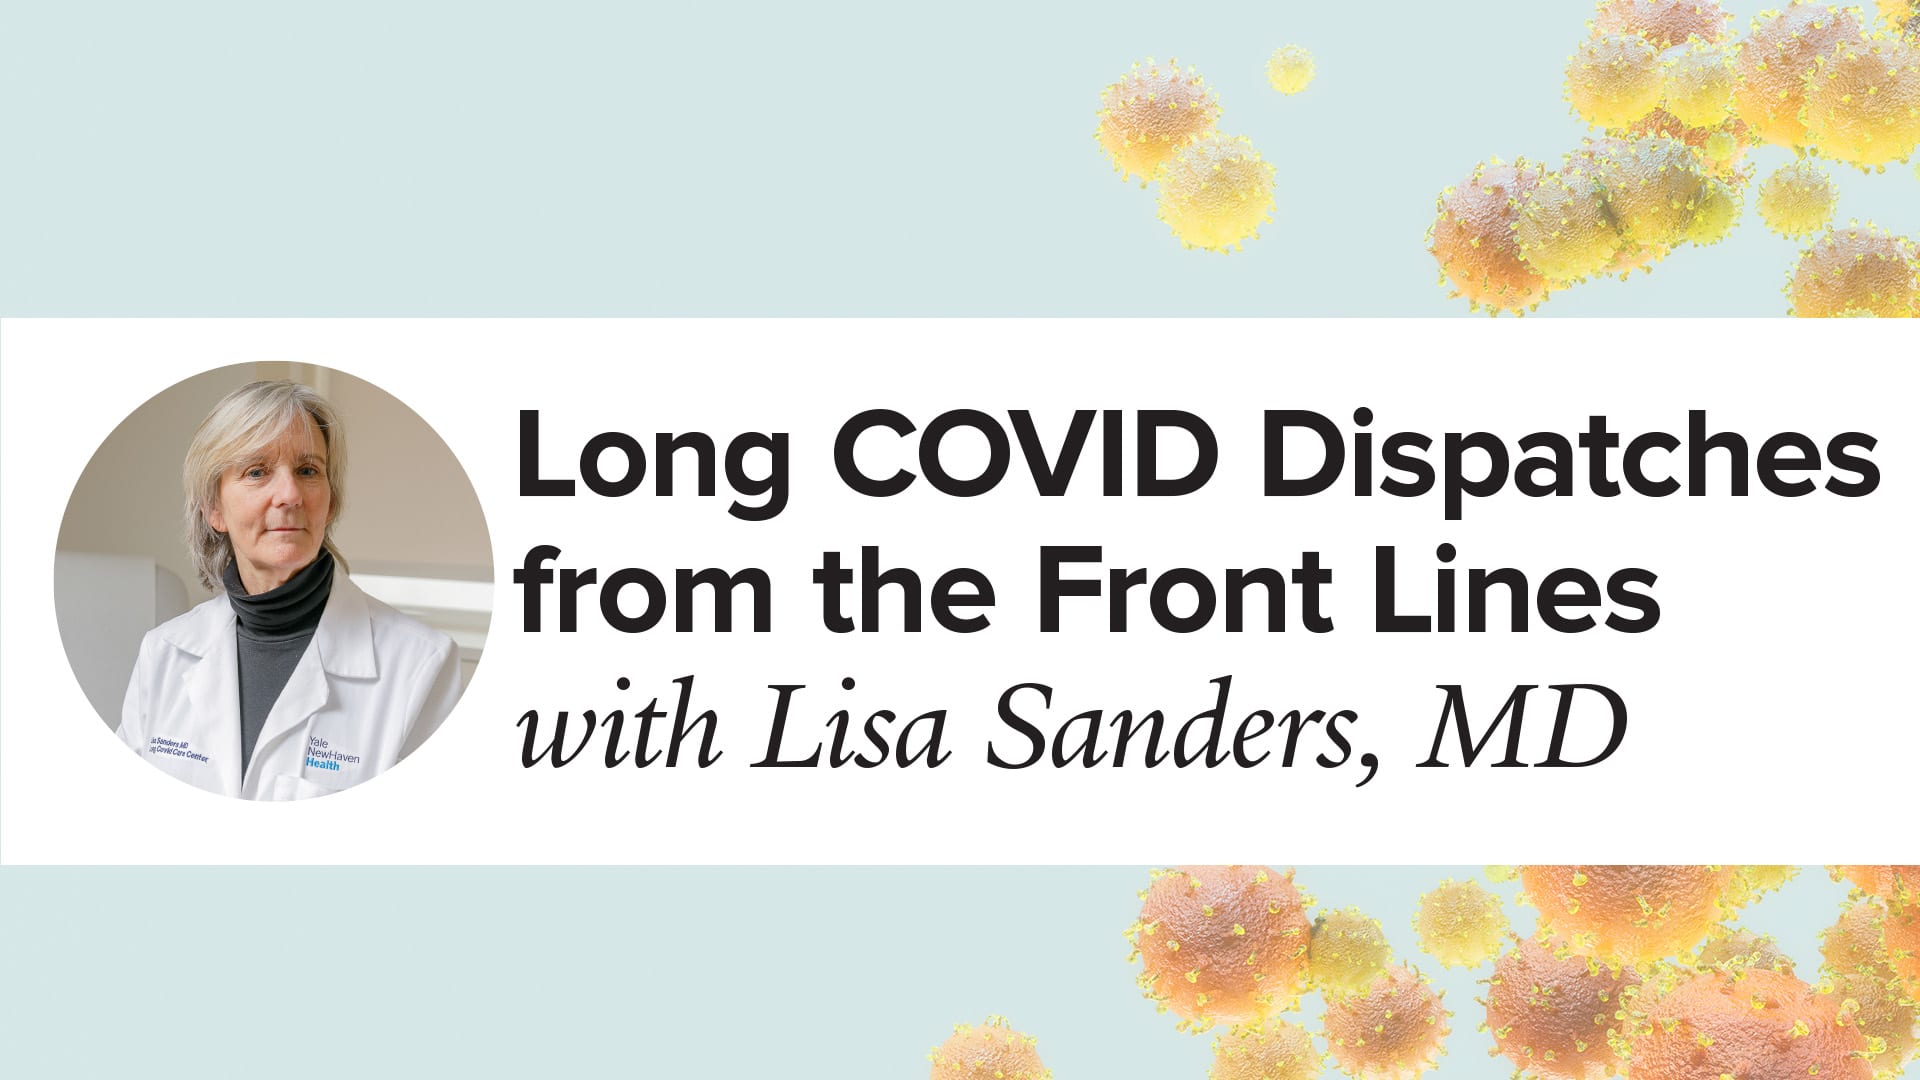 Long COVID Dispatches from the Front Lines with Lisa Sanders, MD and a headshot of Lisa Sanders